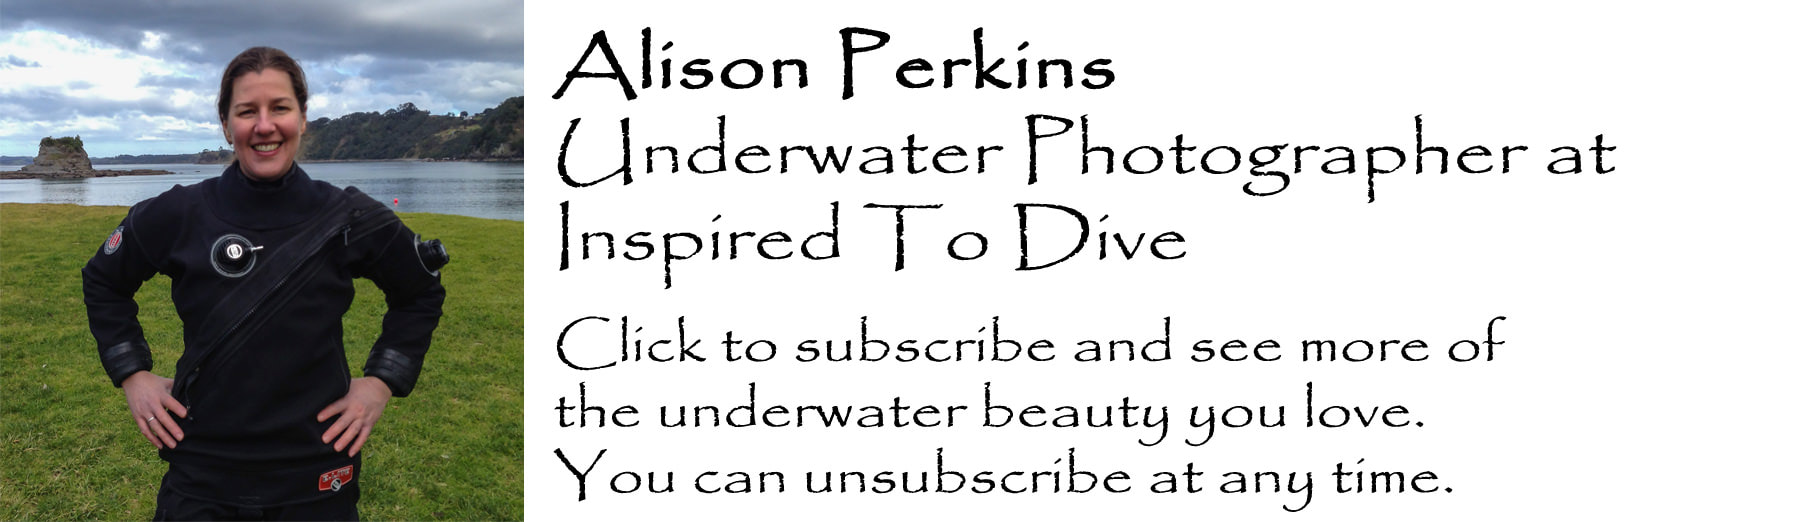 Cave diver and underwater photographer Alison Perkins in New Zealand